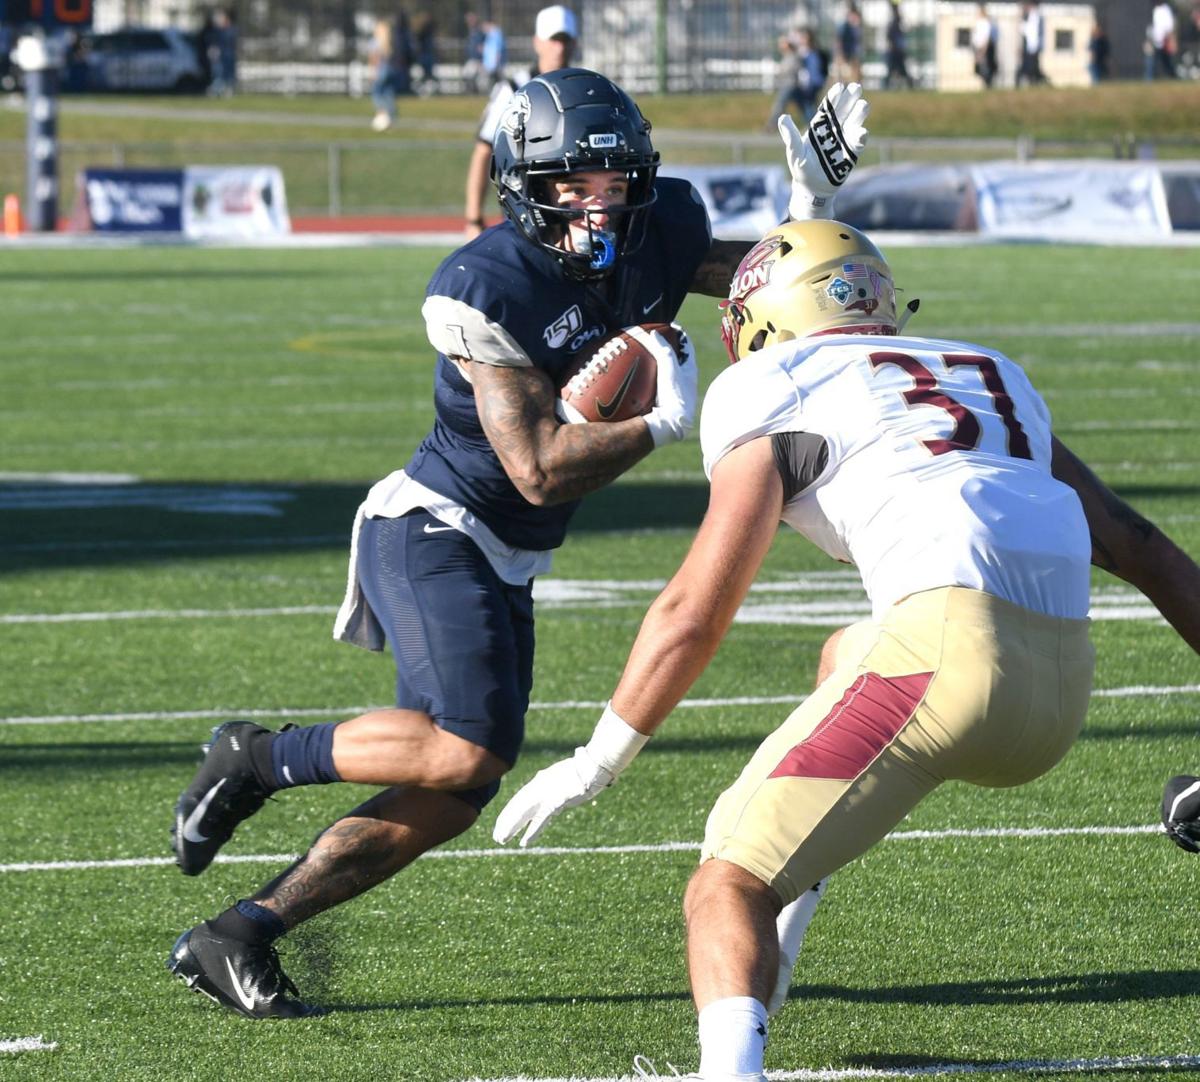 UNH Football Wildcats cranked up pressure en route to third straight